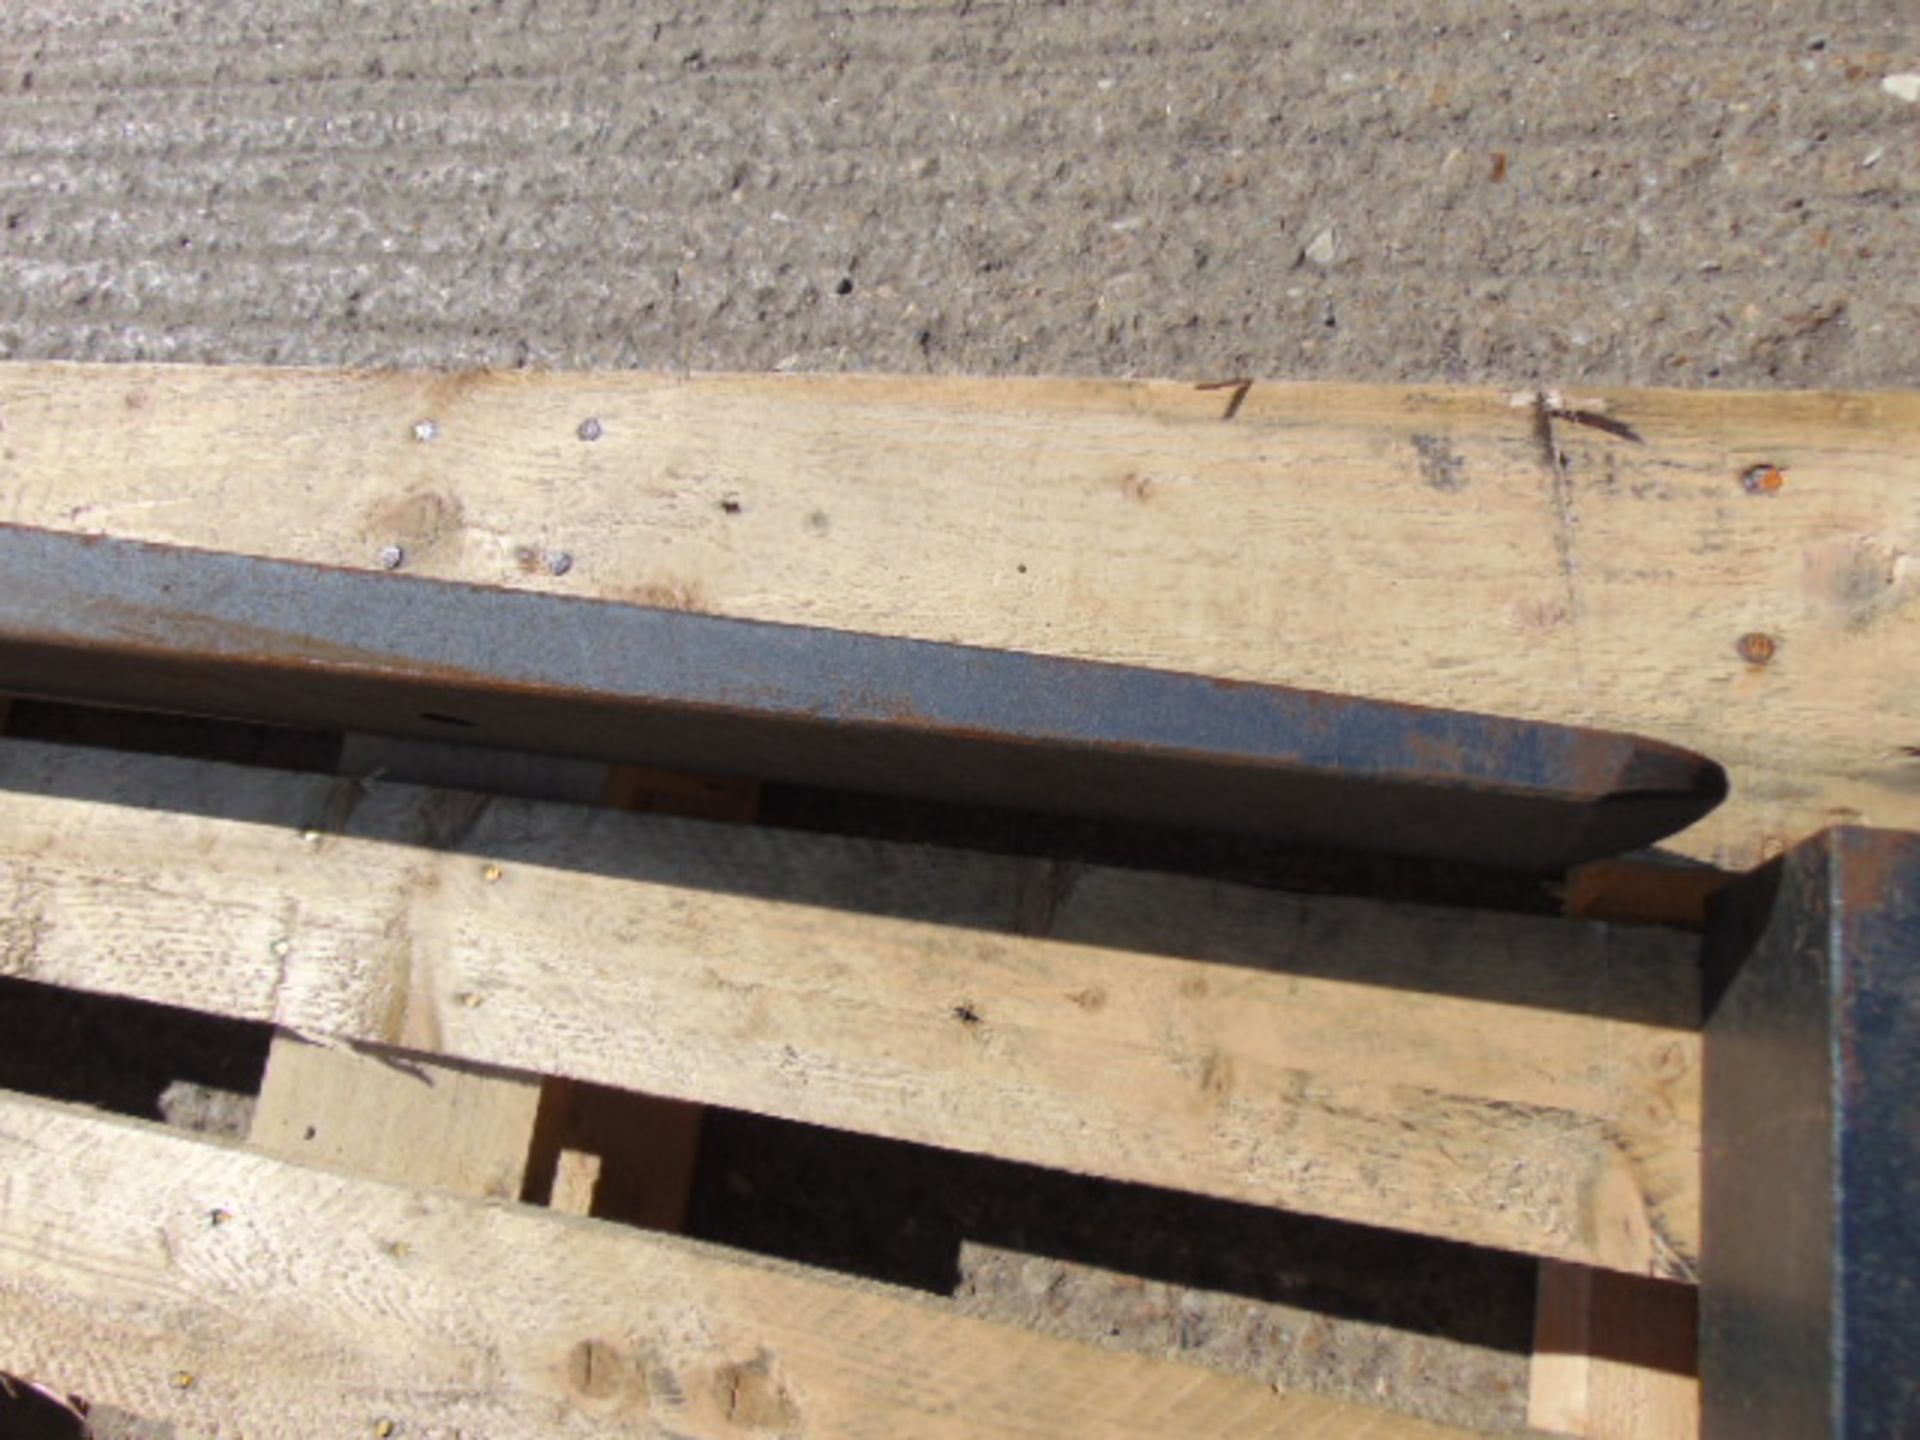 2 x Forklift Tines - Image 3 of 4